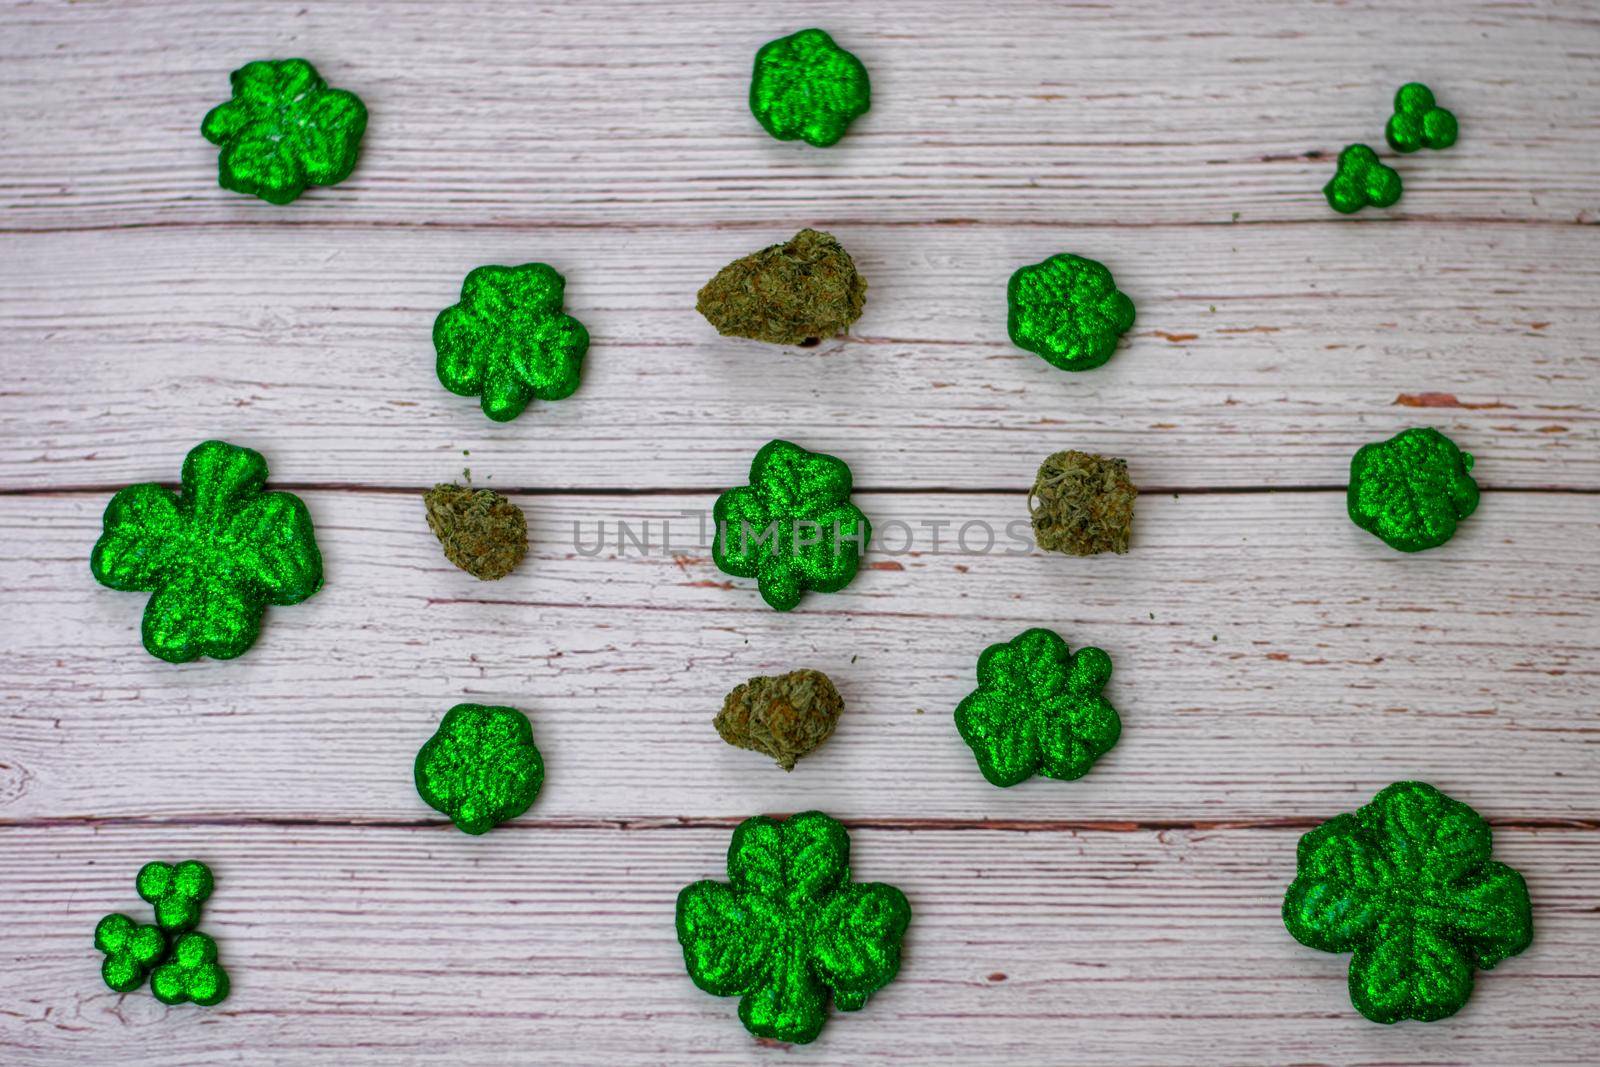 Glitter Covered Four Leaf Clovers for Saint Pattys Day and Large Cannabis Nugs on a White Wooden Background